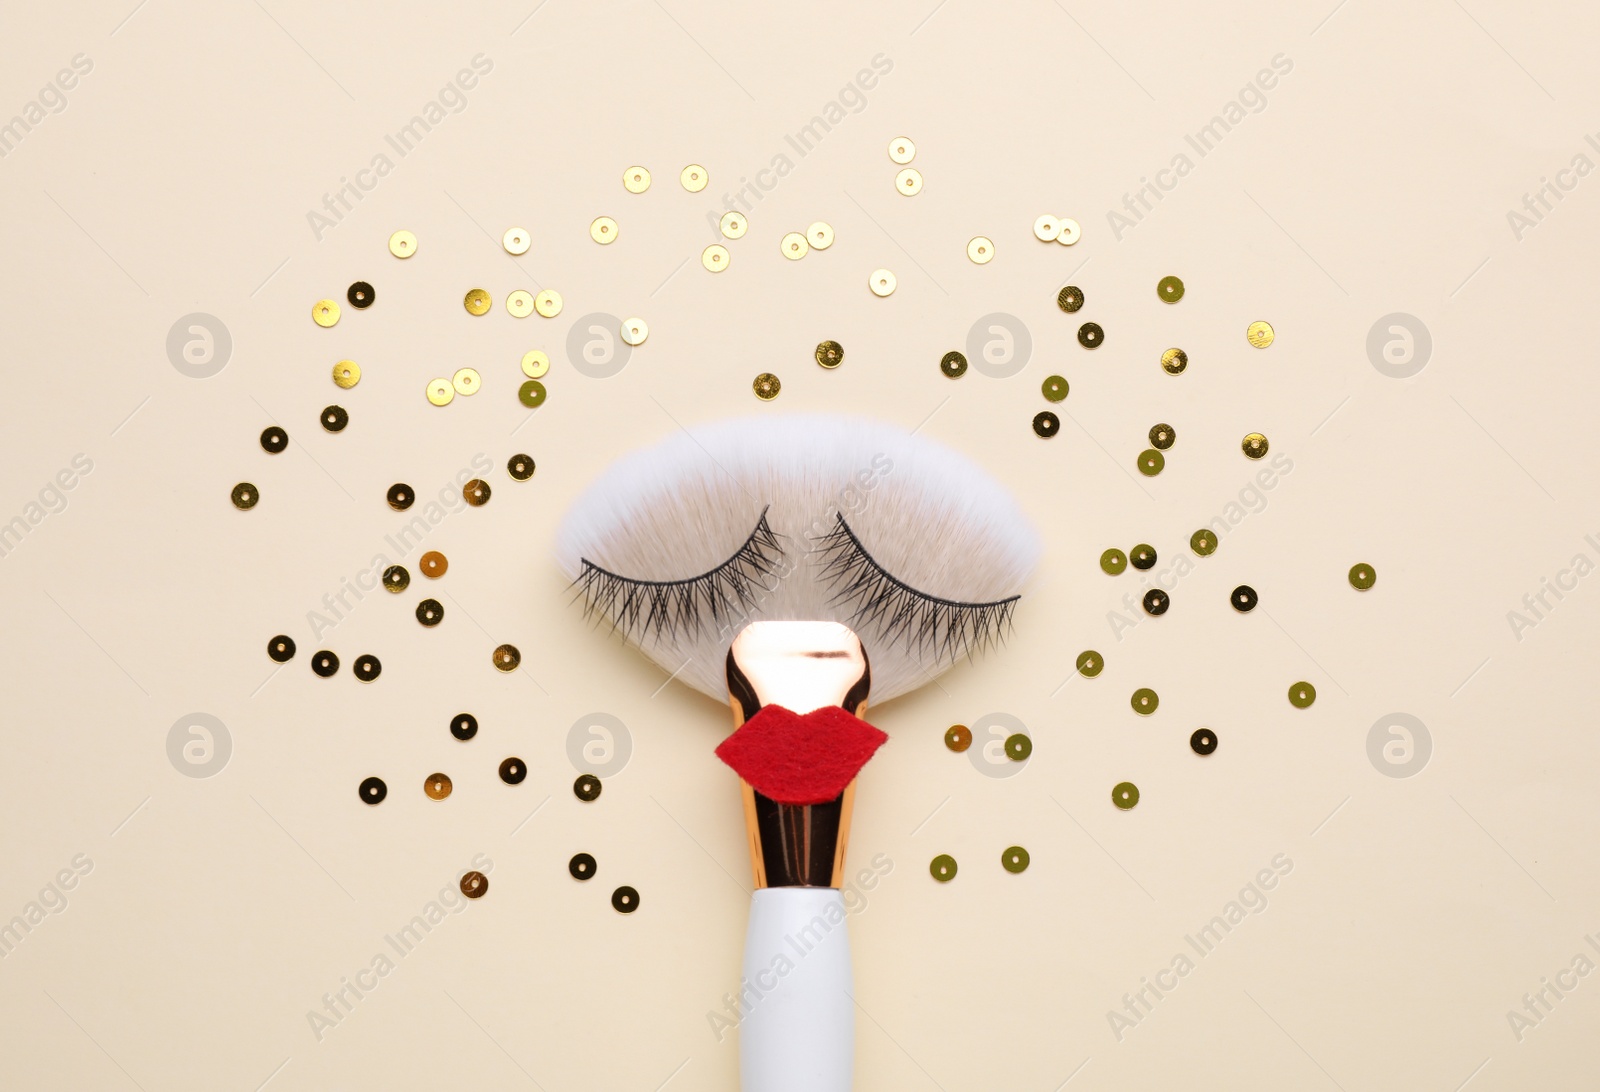 Photo of Makeup brush with false eyelashes and red lips as beautiful face on beige background, flat lay